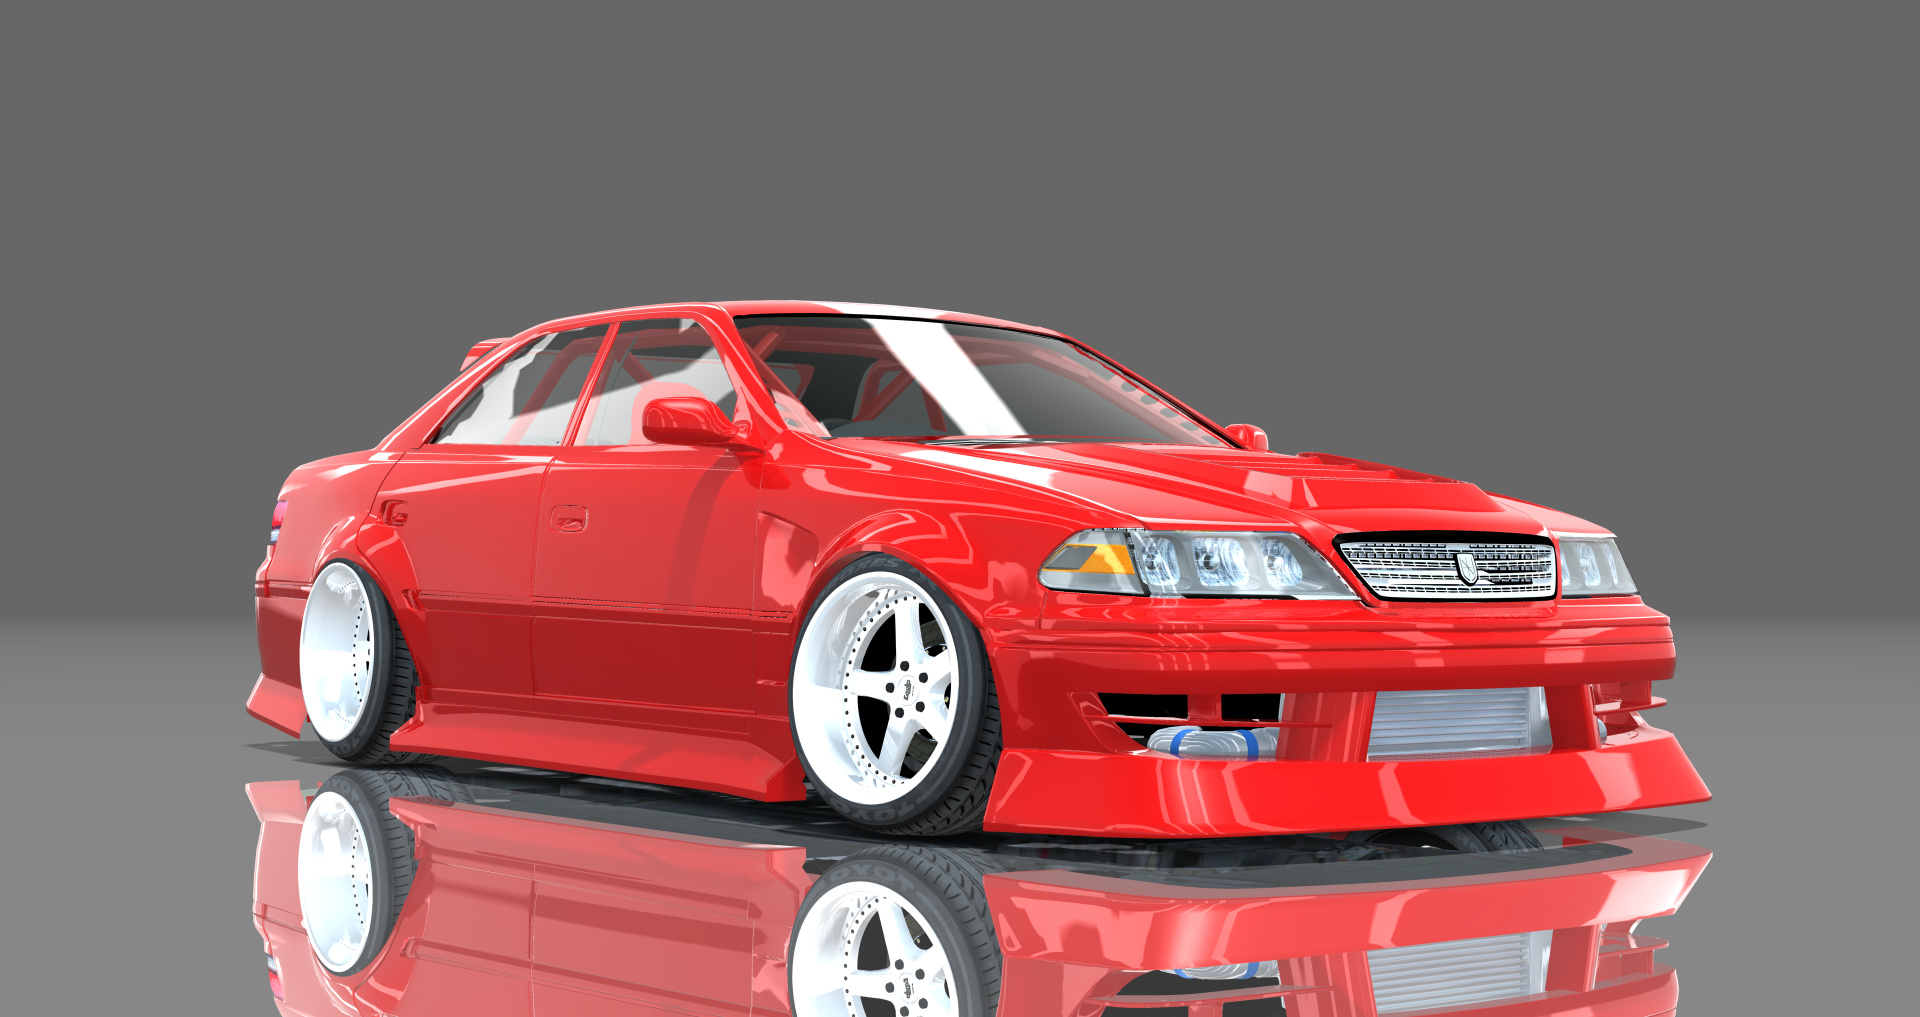 DTP Toyota JZX100 Mark2, skin red